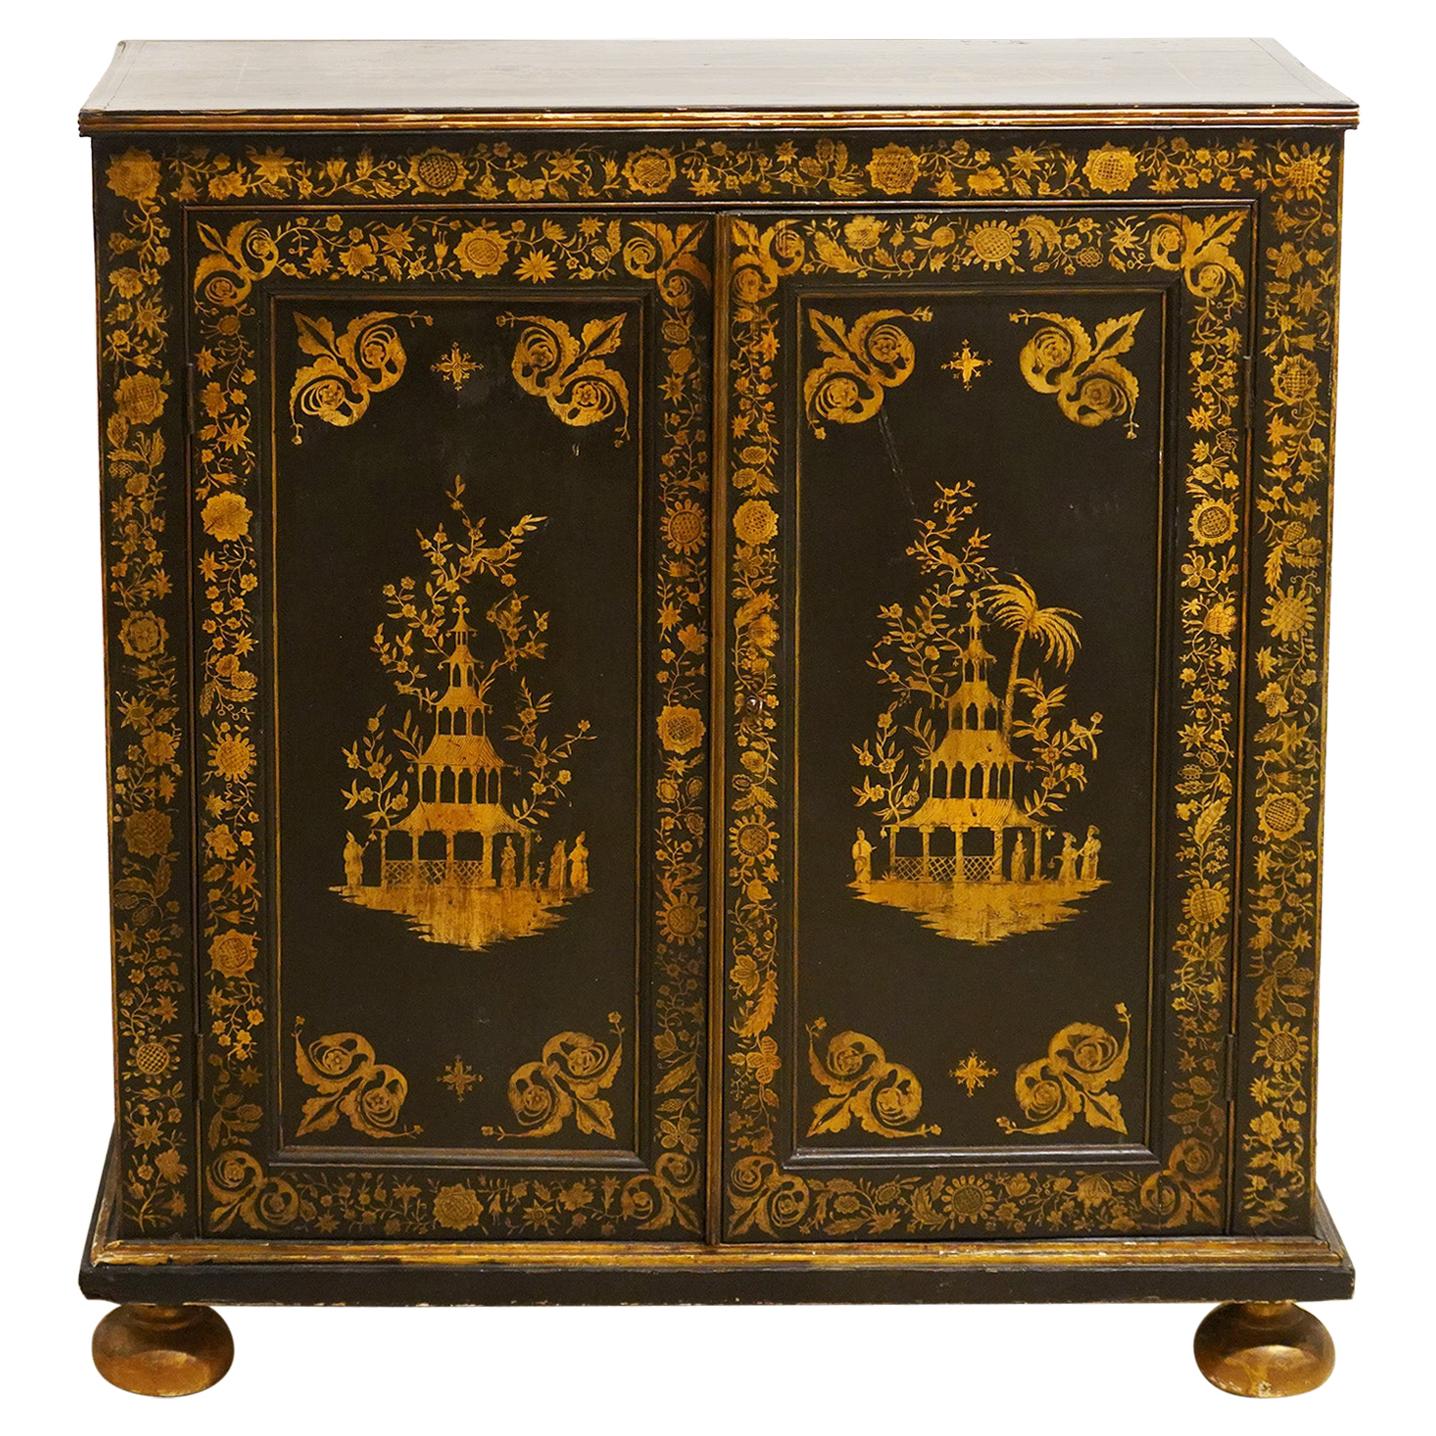 Early 19th Century English George III Chinoiserie Penwork Two-Door Side Cabinet